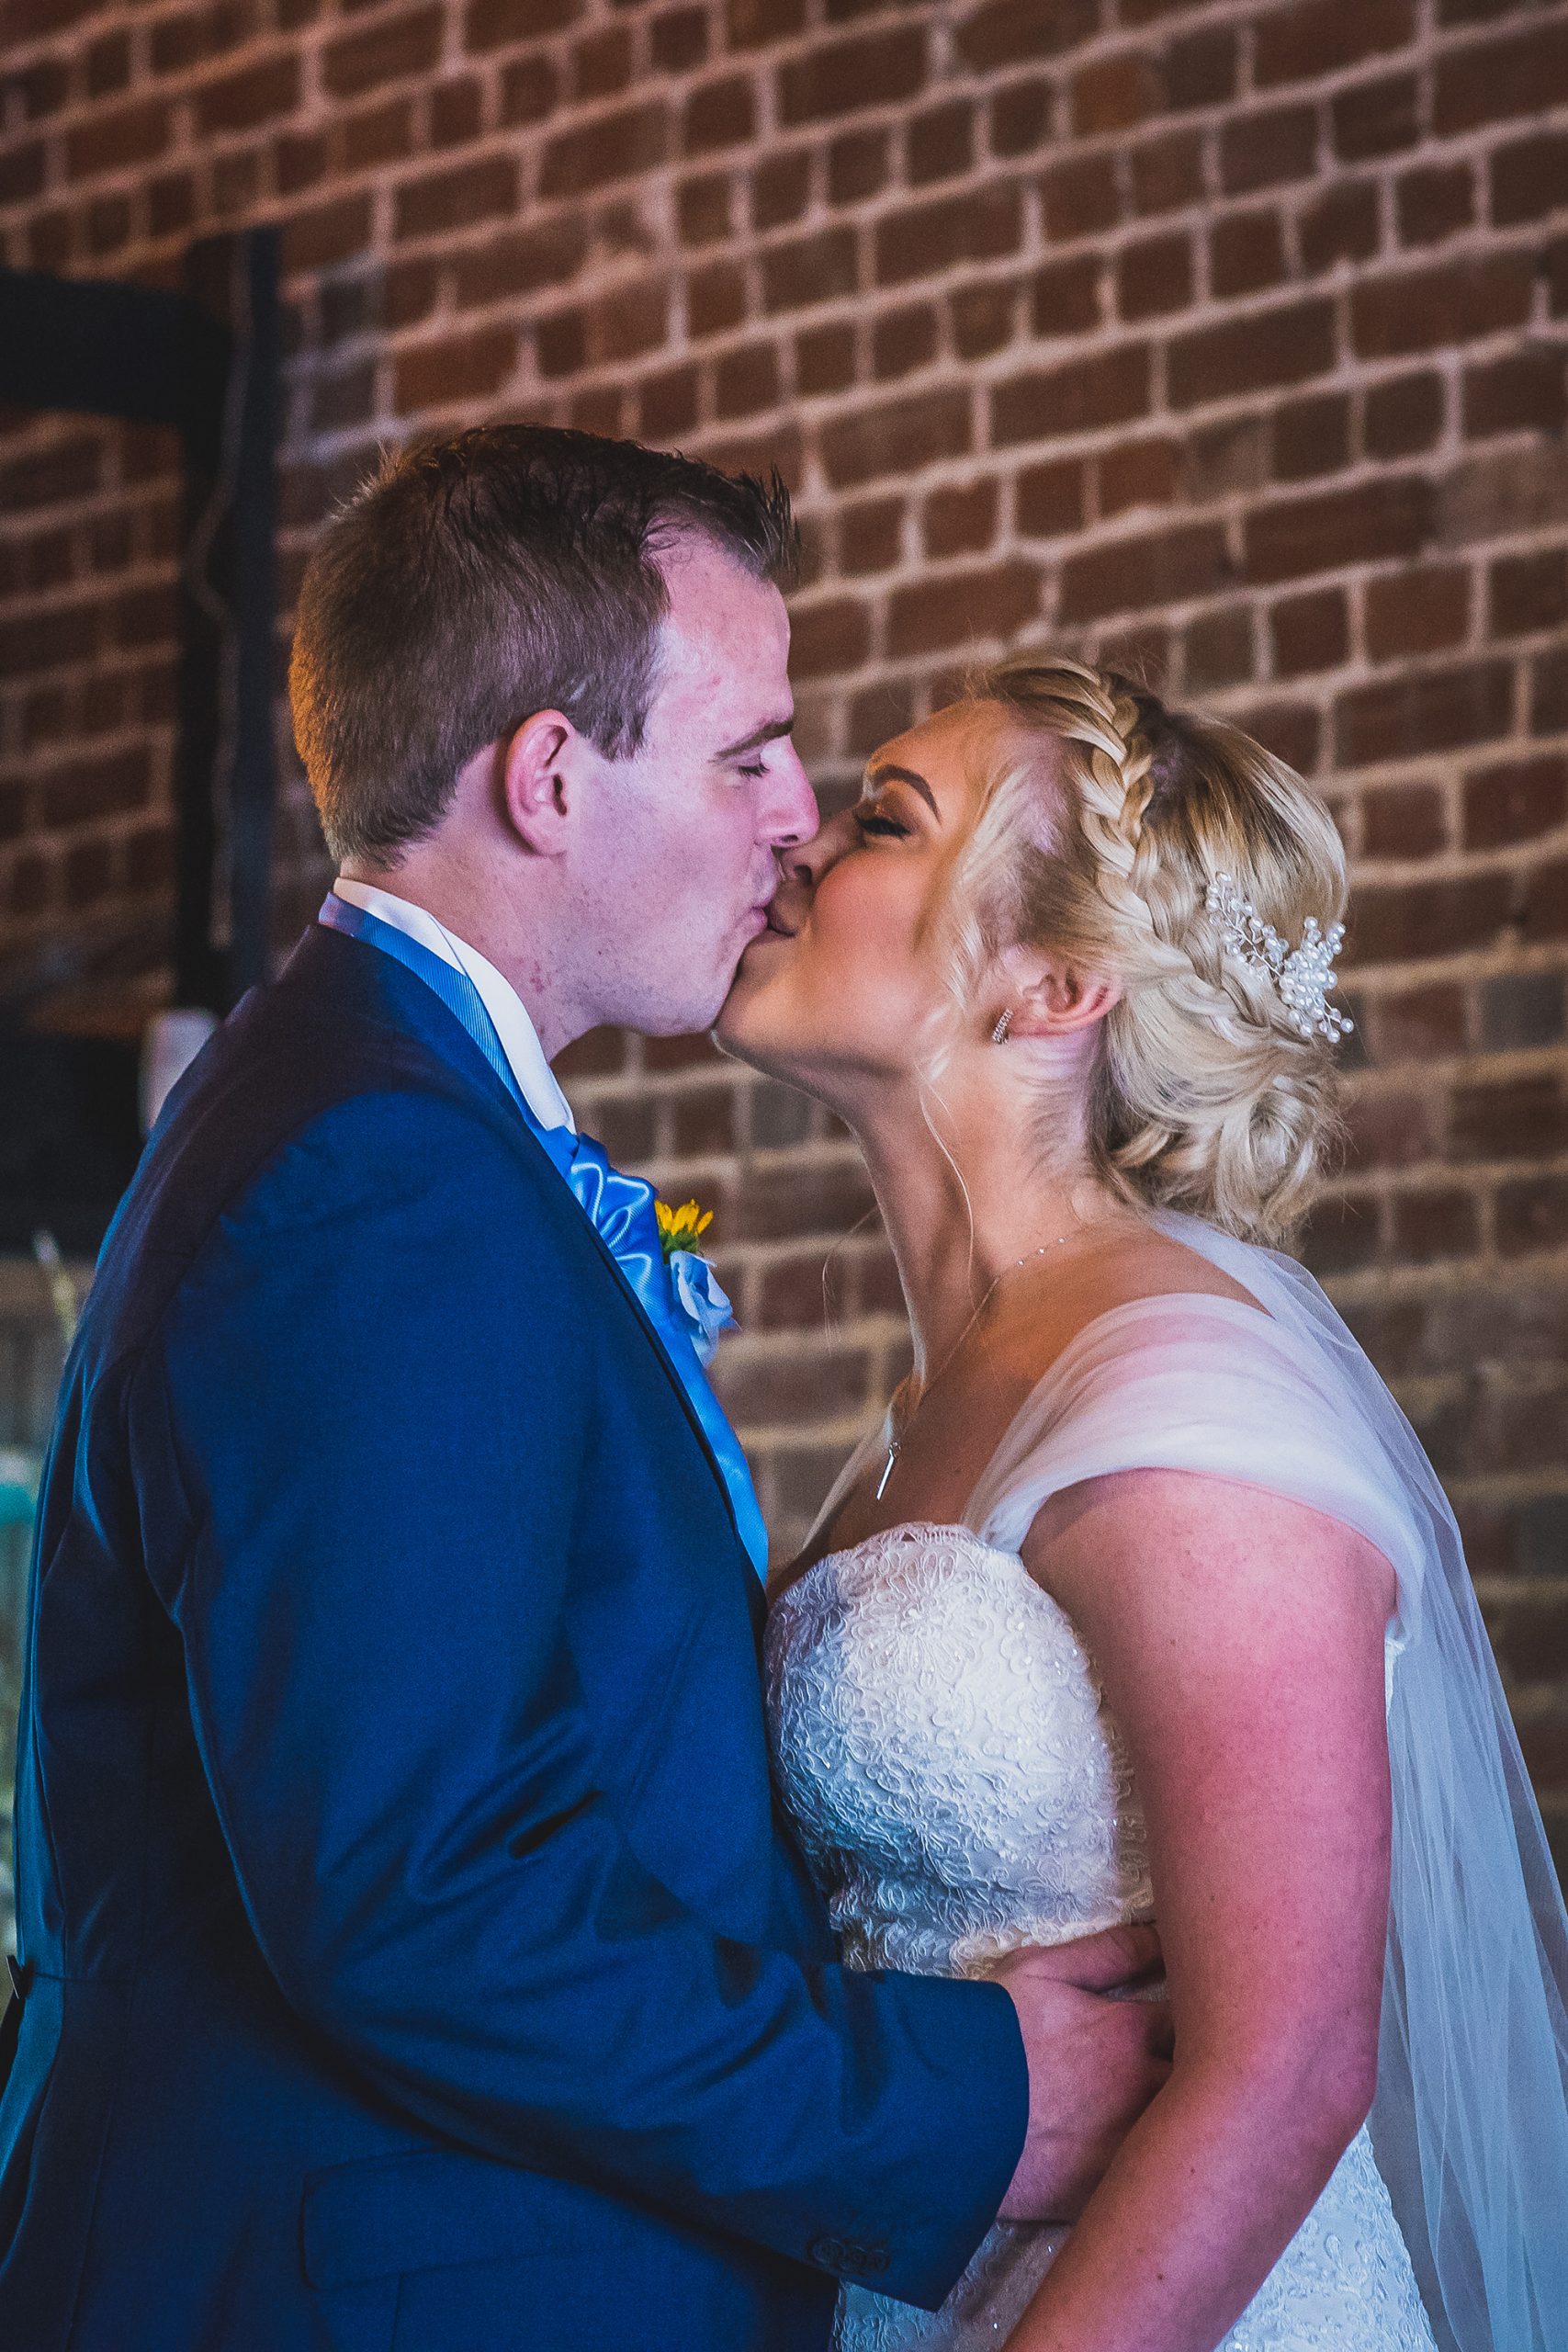 Ellie Andy Rustic Barn Wedding Damien Vickers Photography SBS 012 scaled